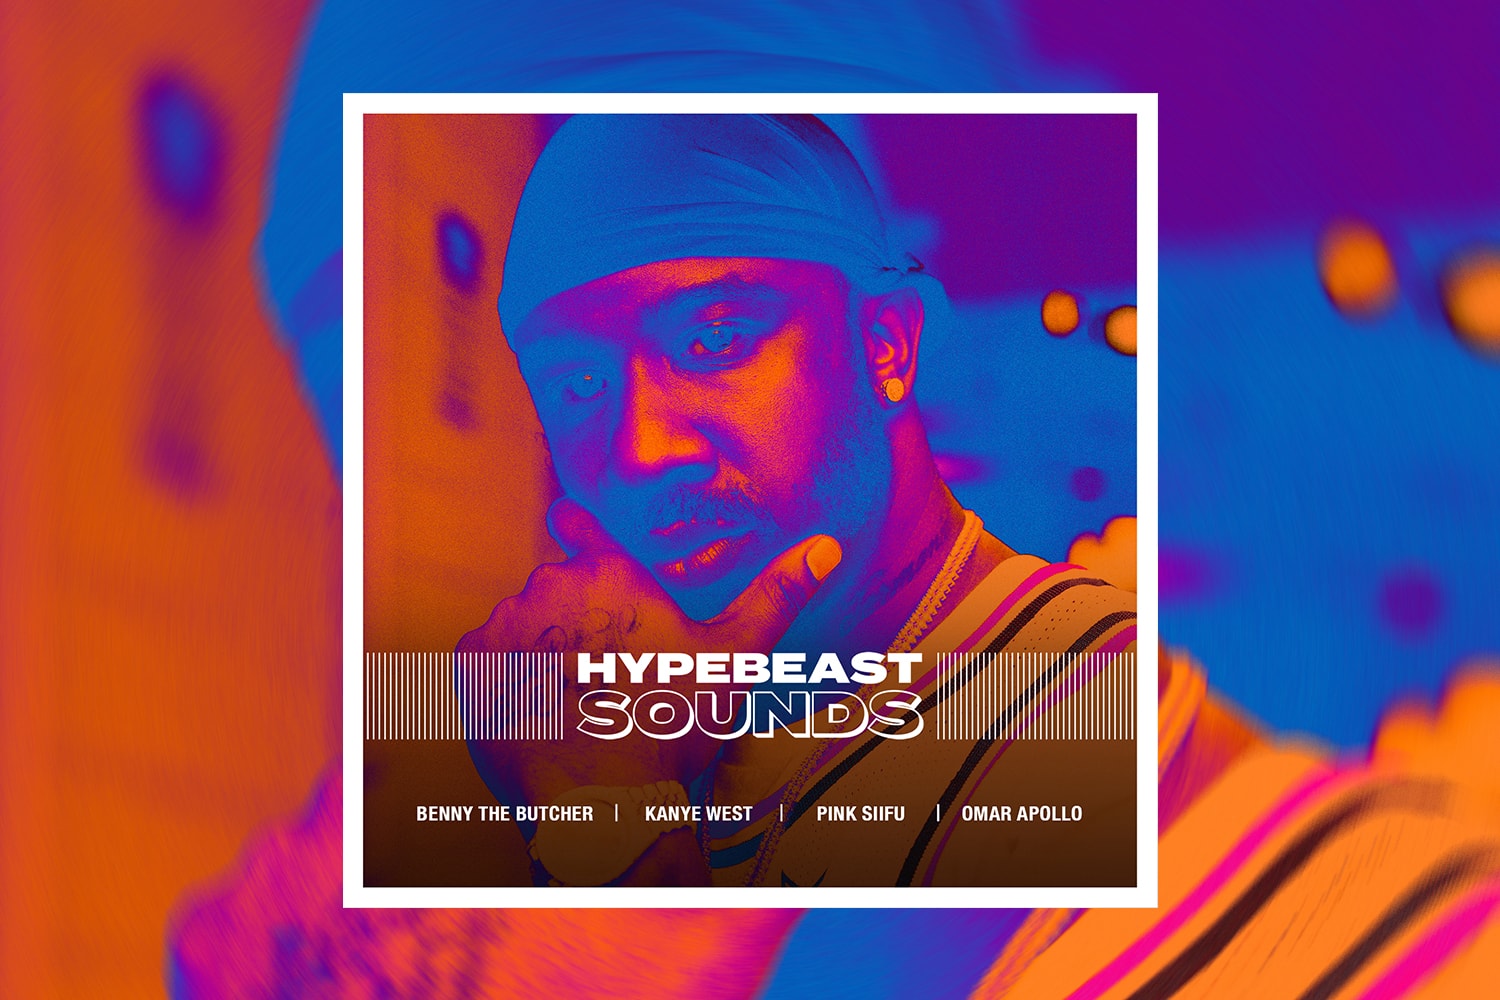 HYPEBEAST SOUNDS Playlist Spotify Music Best New Tracks Benny The Butcher Kanye West Pink Siifu Fly Anakin Rap HipHop Alt Indie Saint JHN Yeezy Season Omar Apollo Release Dates Upcoming Music 